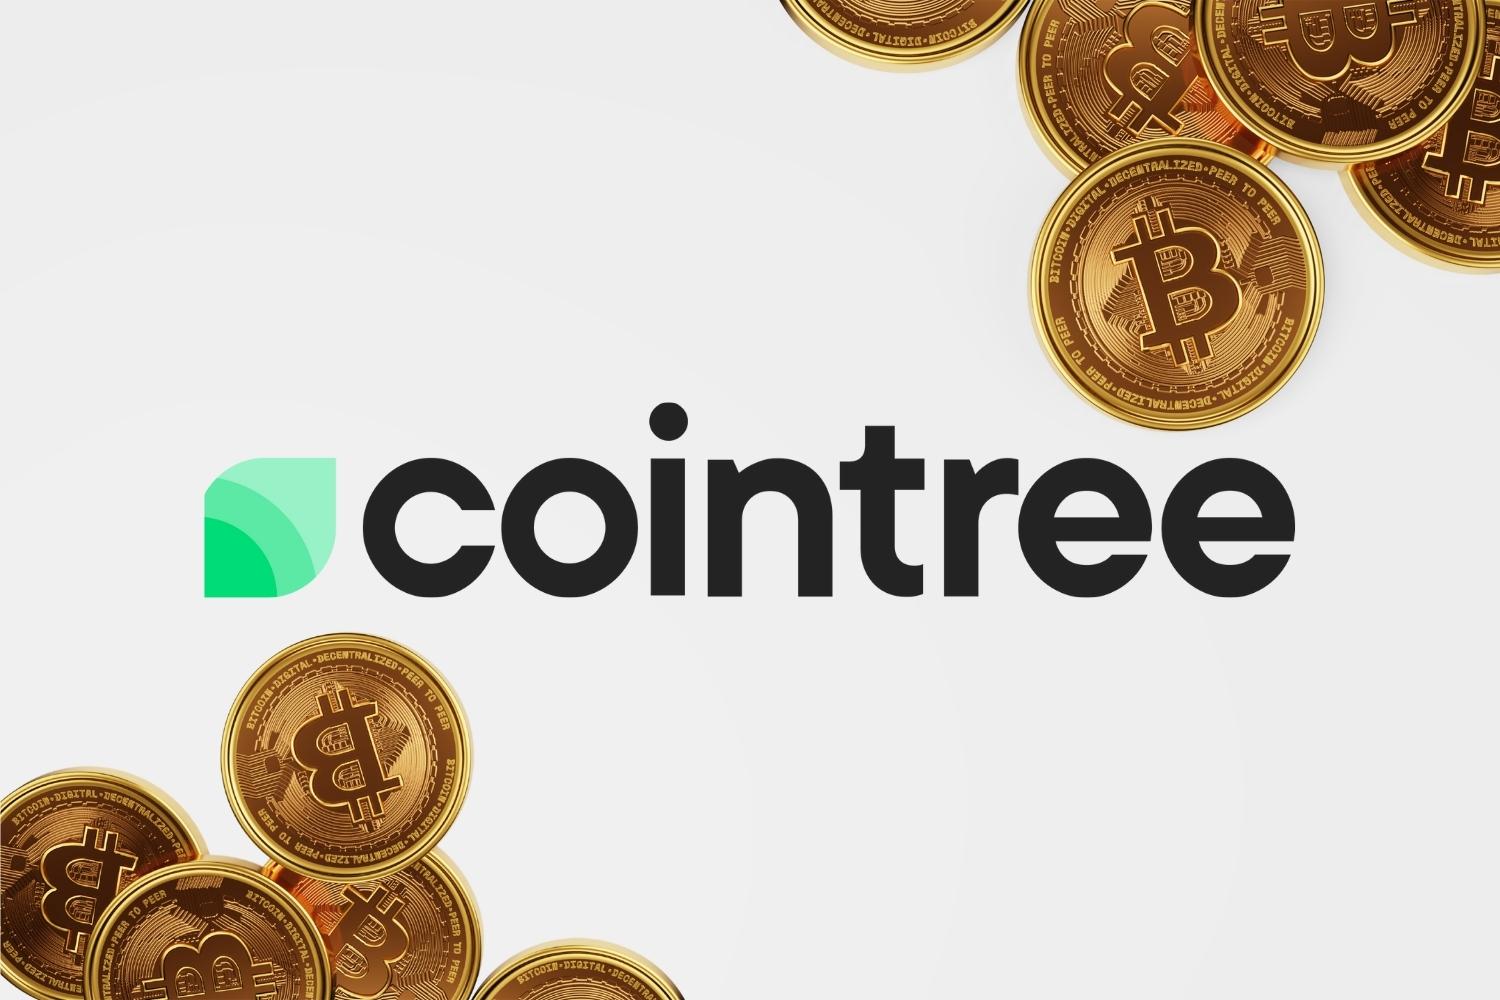 Cointree Review 2022: Everything Australian Investors Need To Know